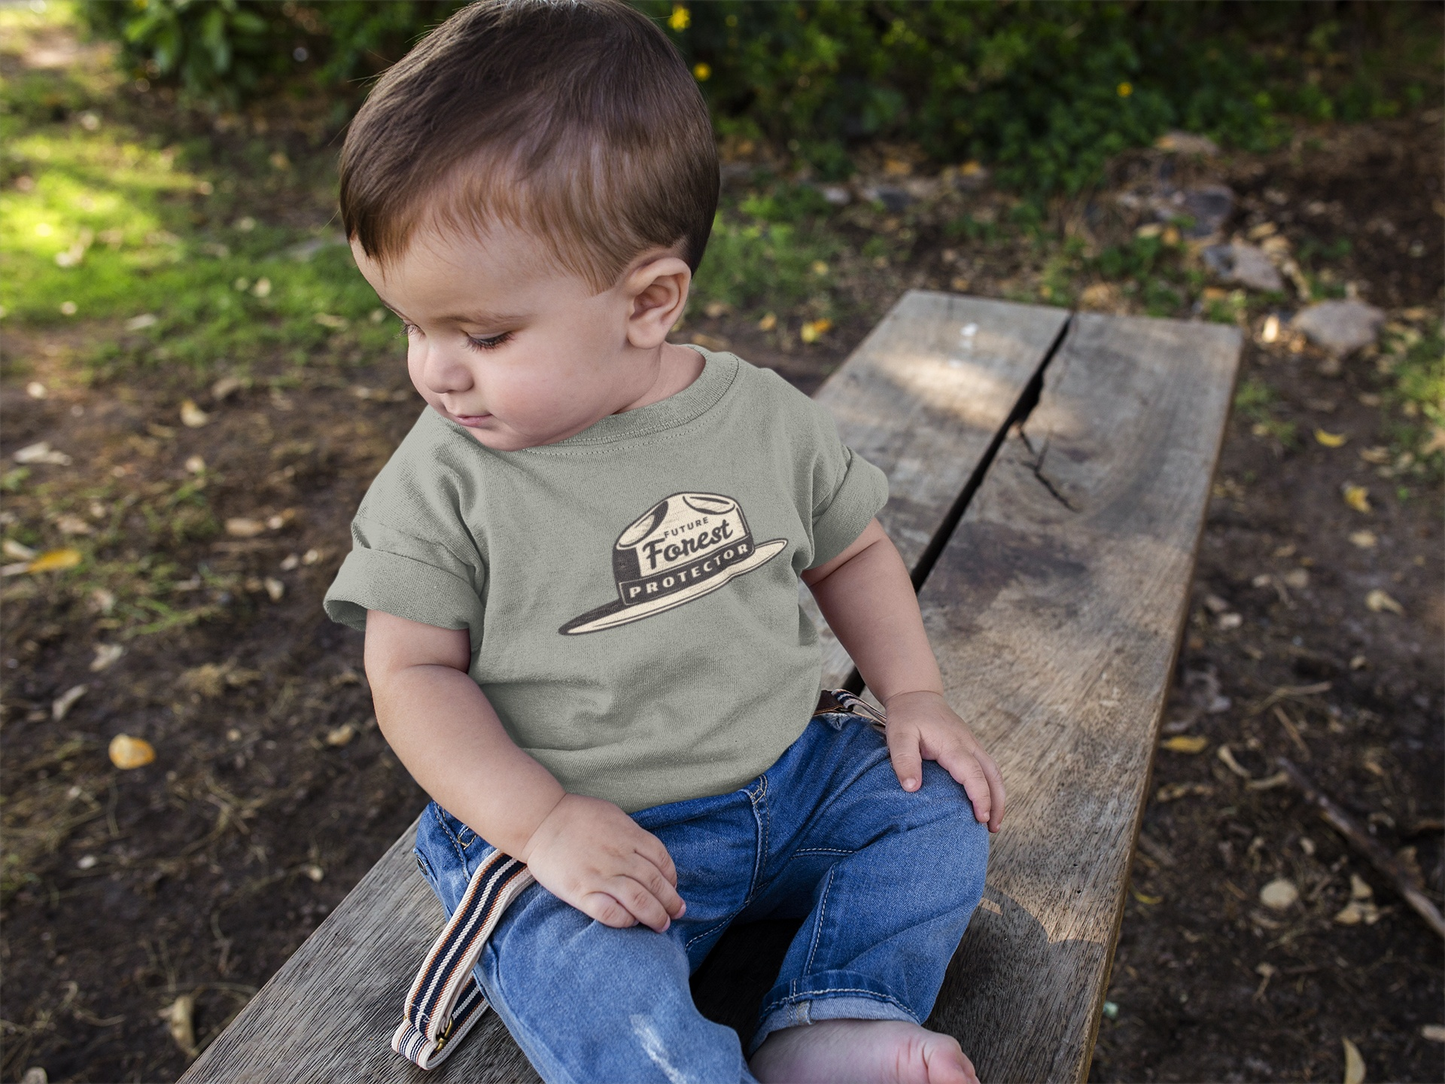 Future Forest Ranger Toddler ShirtInspire those youngins to get outside and become stewards of nature from day one! A great gift for adventure mamas to be :)
- jersey cotton- soft and lightweight
The